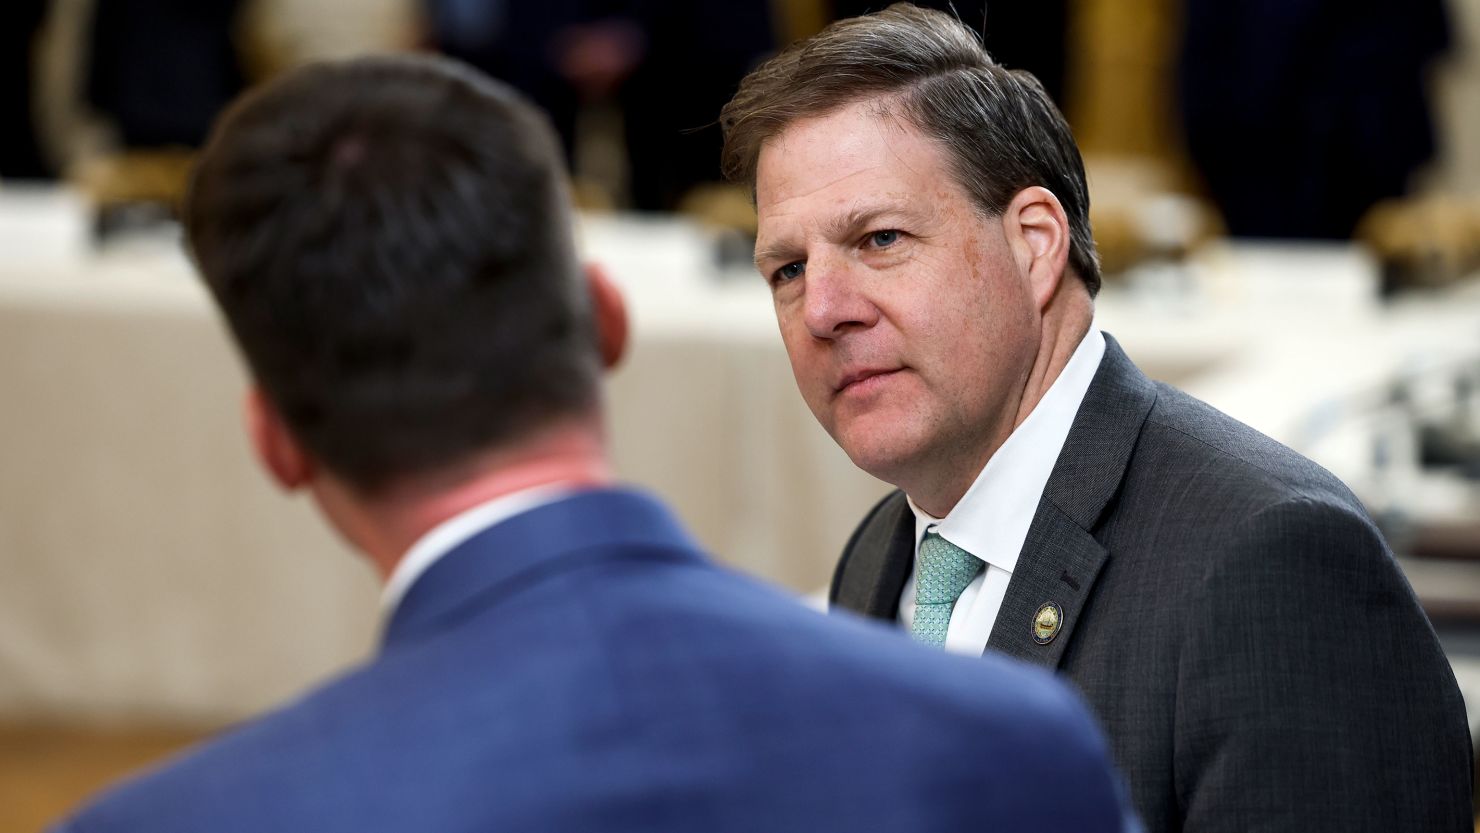 New Hampshire Governor Chris Sununu  waits for the start of a meeting between U.S. President Joe Biden and governors visiting from states around the country in the East Room of the White House on February 10, 2023 in Washington, DC.